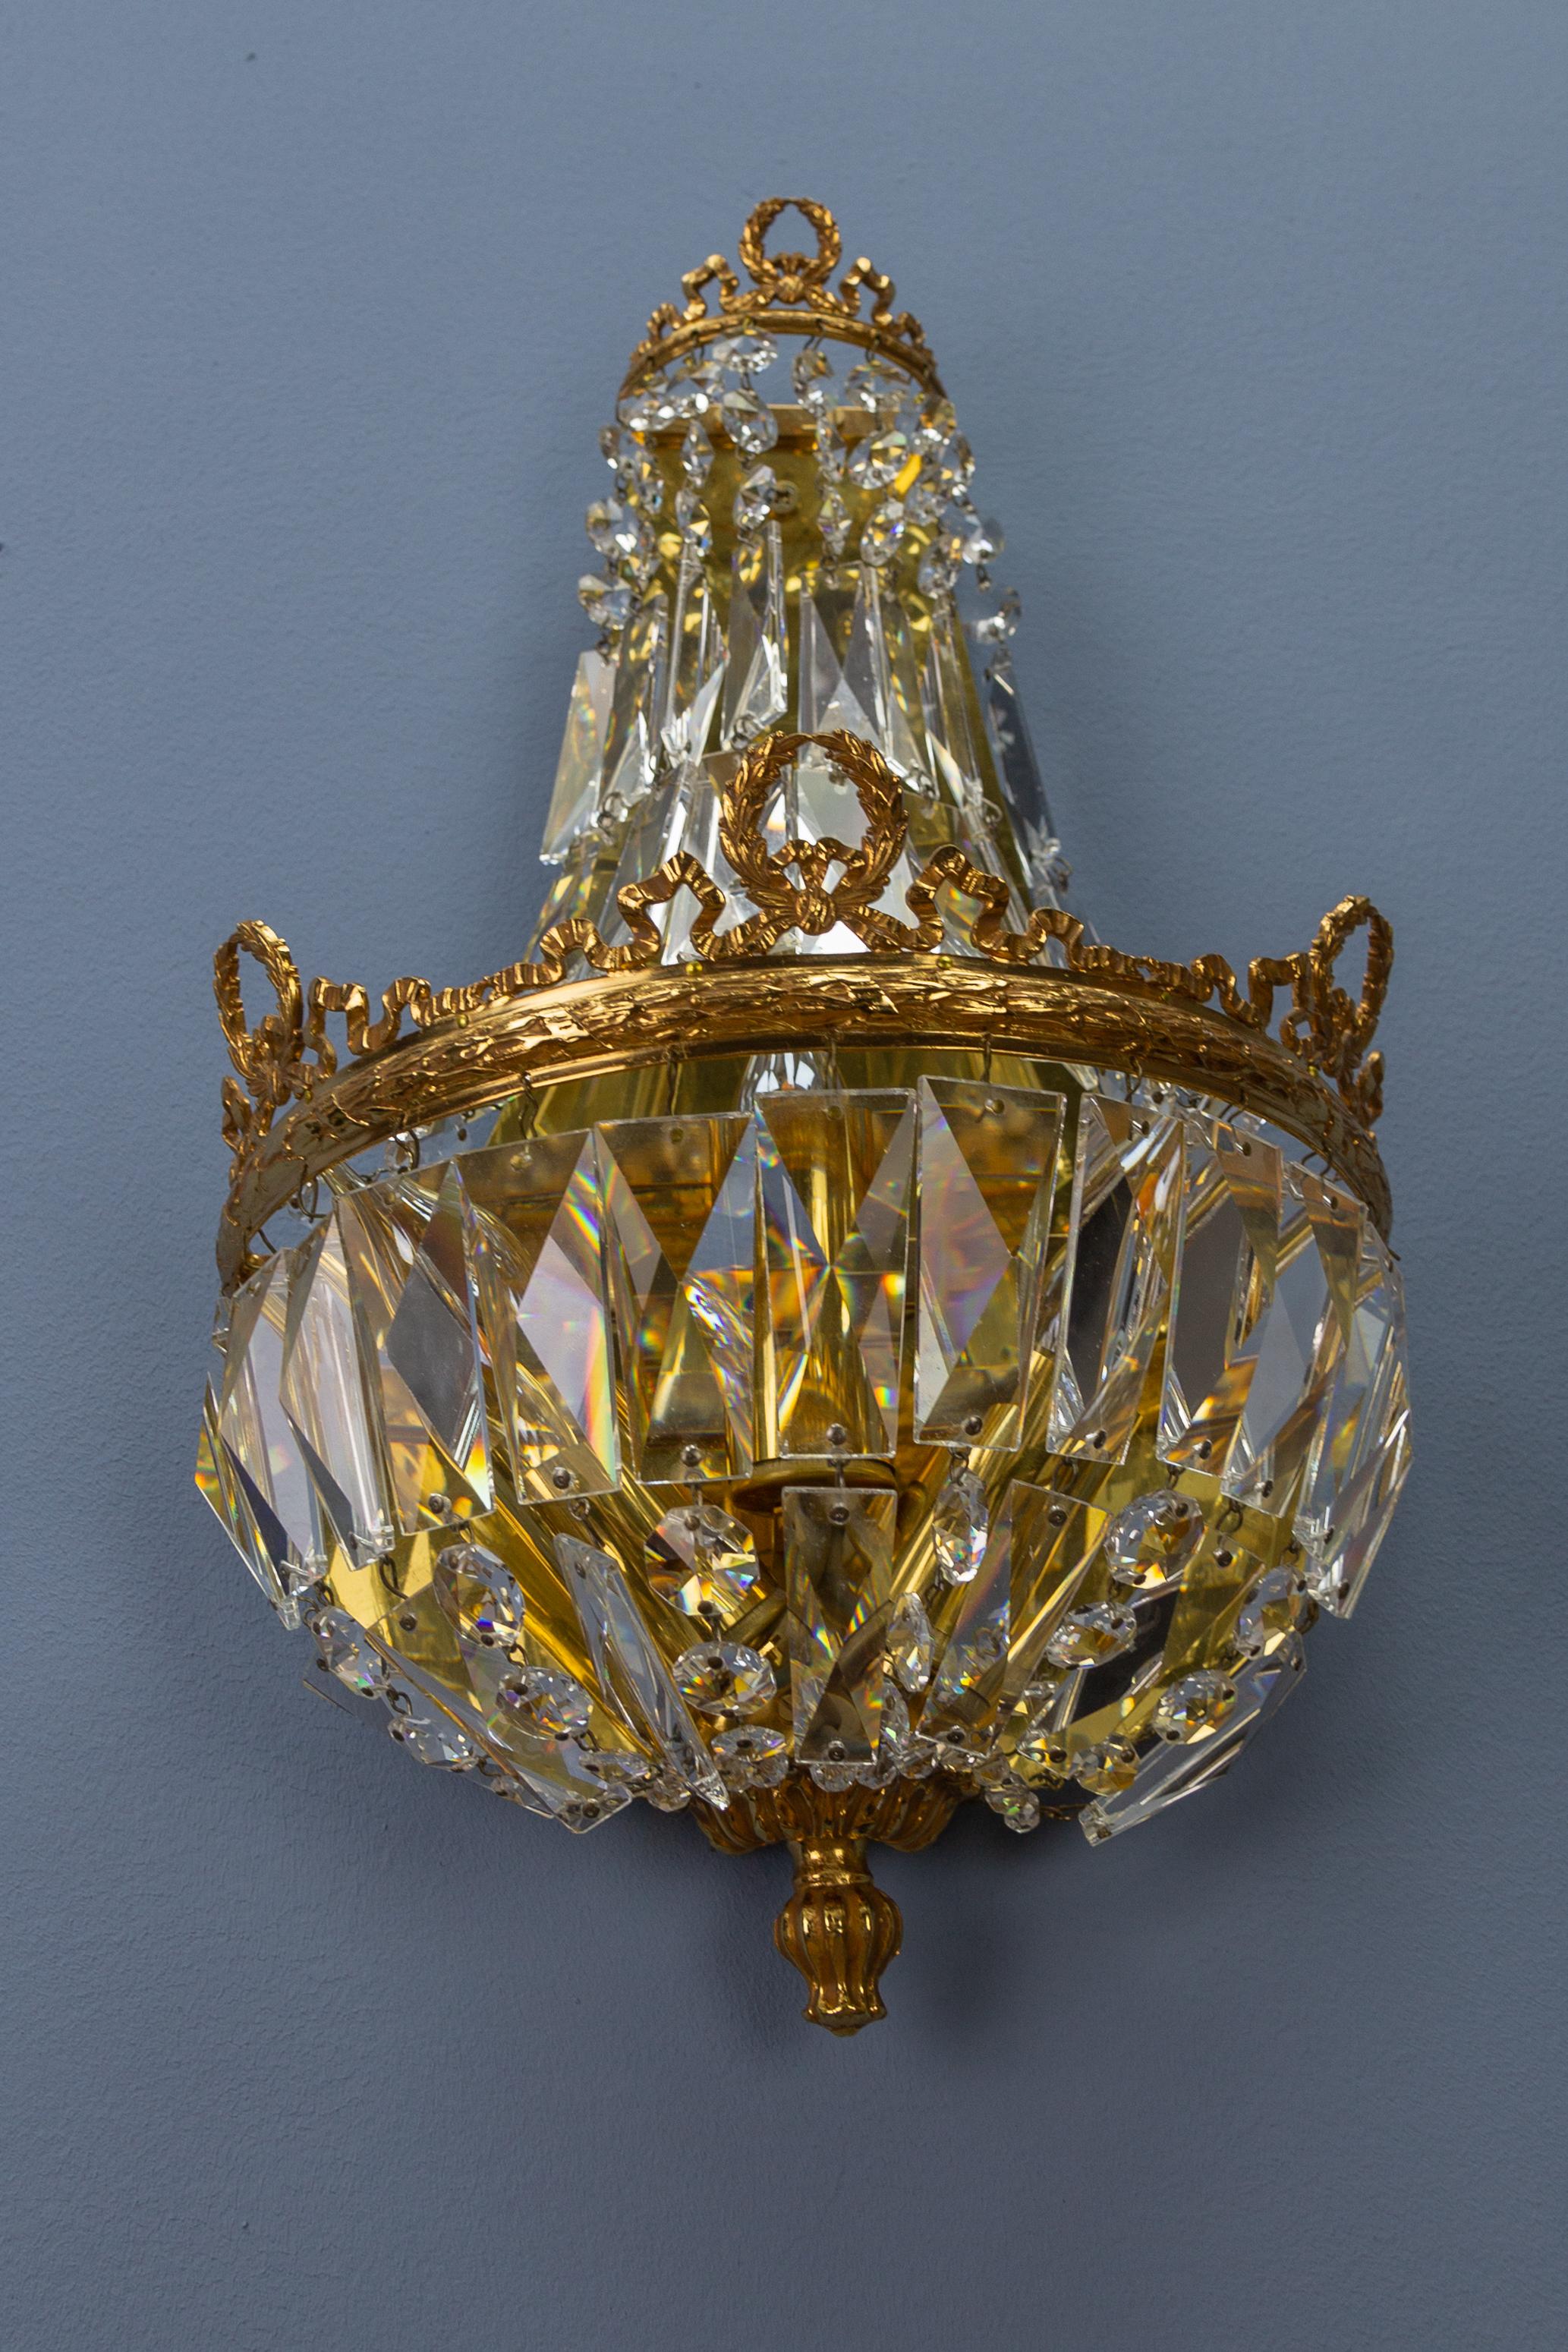 A splendid Empire-style sconce by Palwa, Germany, 1960s. Gilt brass frame adorned with crystal glass beads and prisms, three interior lights for E14 size light bulbs.
Dimensions:
Height: 38 cm / 14.96 in; width: 22 cm / 8.66 in; depth: 13 cm / 5.11